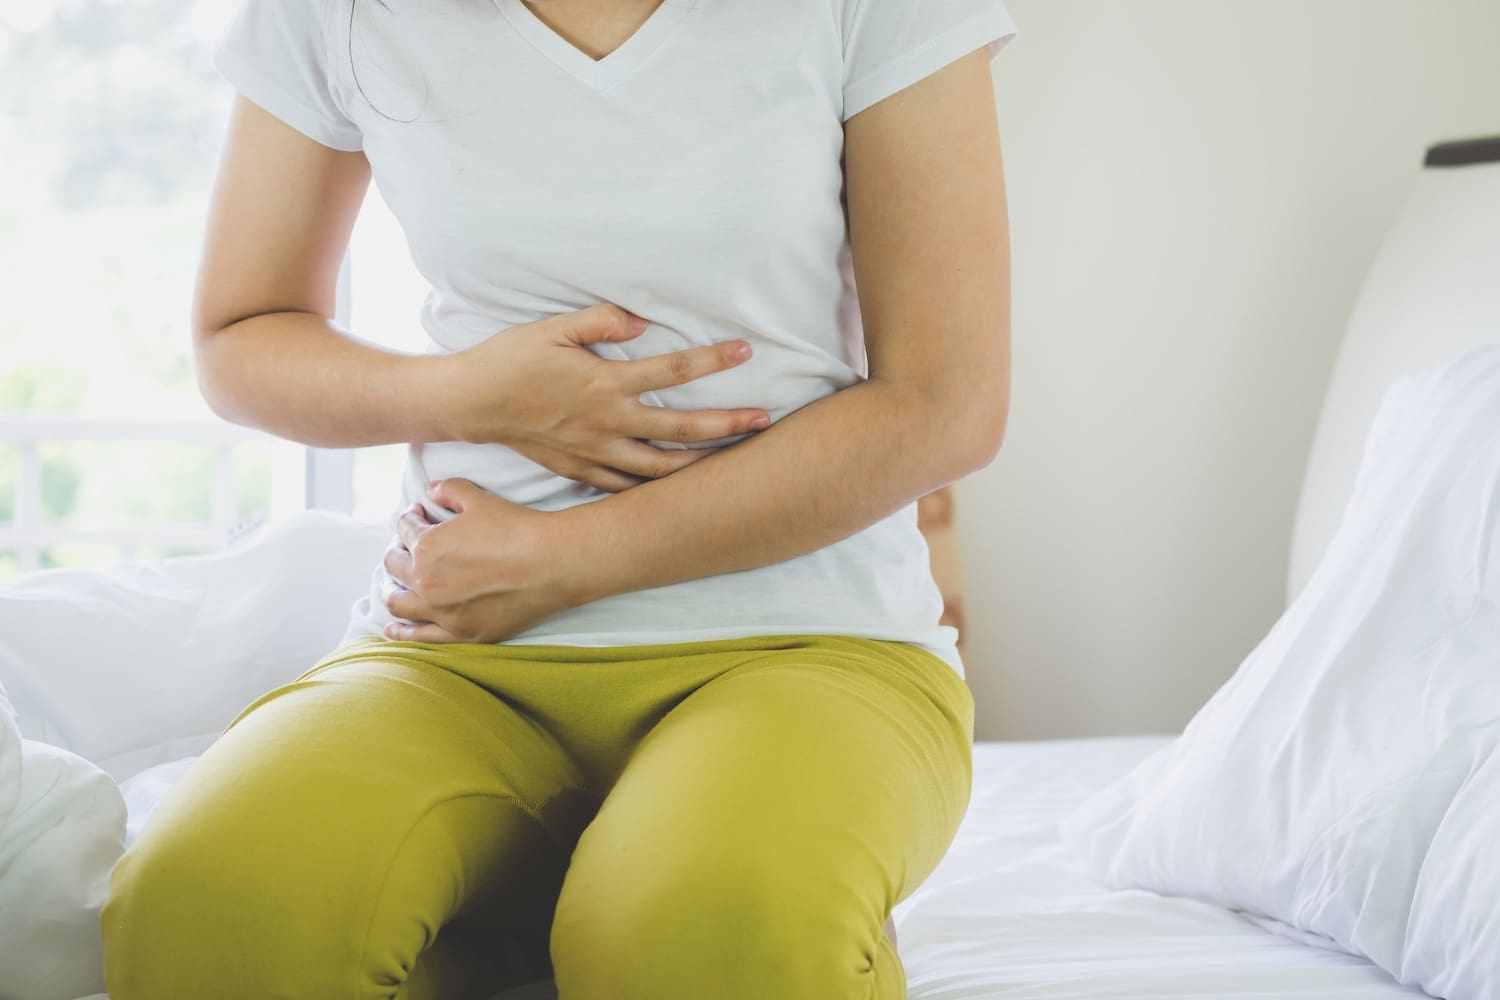 Peptic ulcers: what are the symptoms?